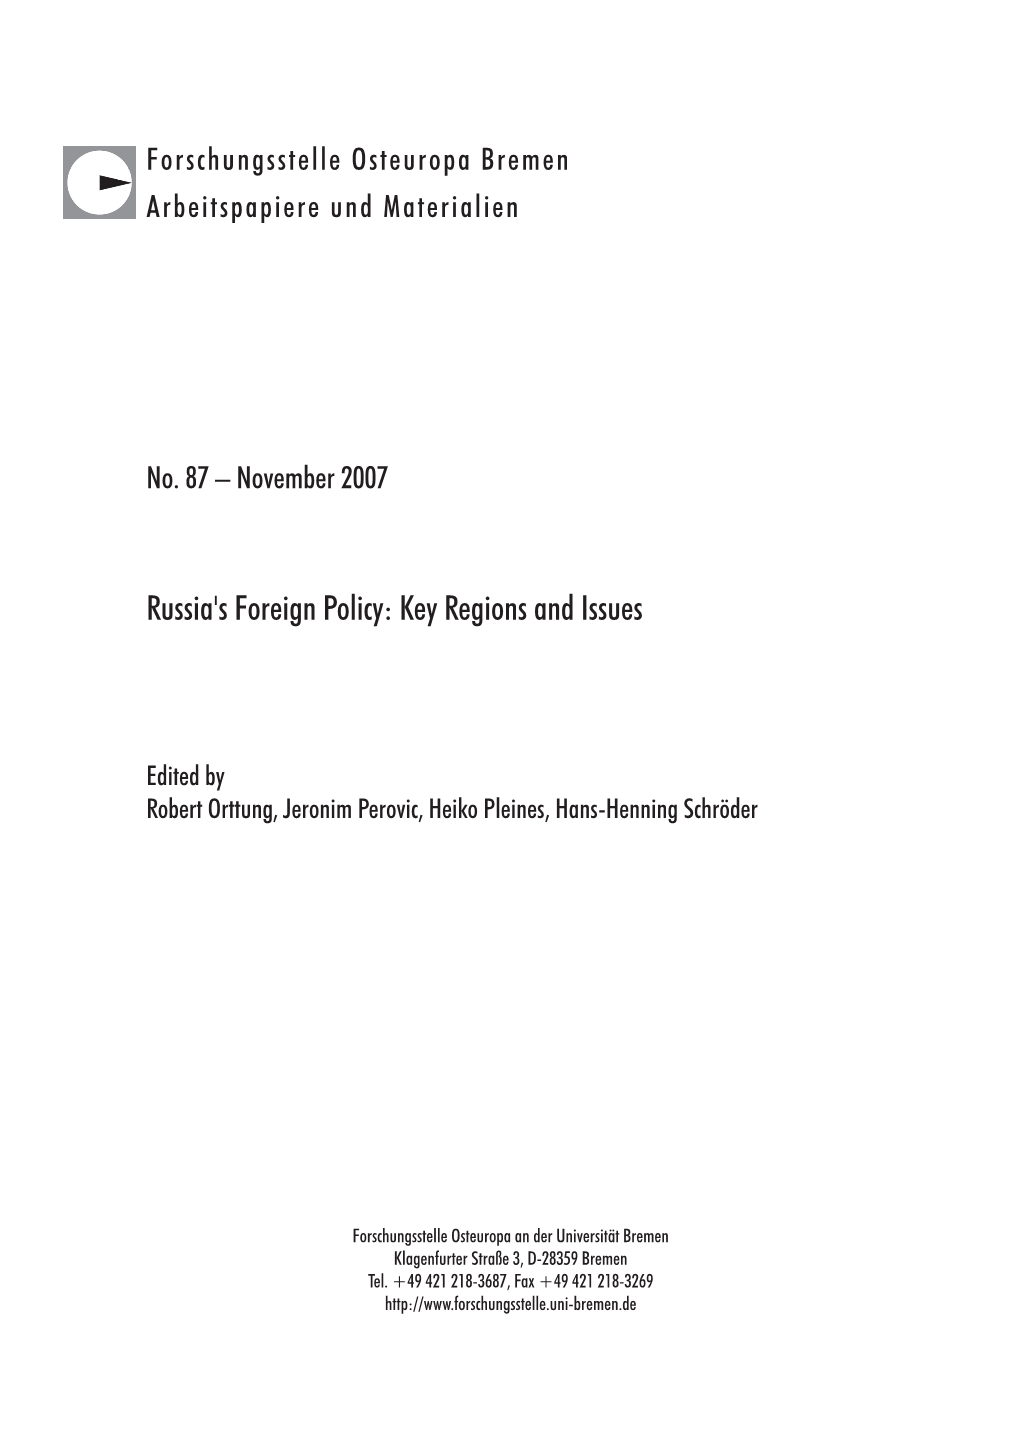 Russia's Foreign Policy: Key Regions and Issues